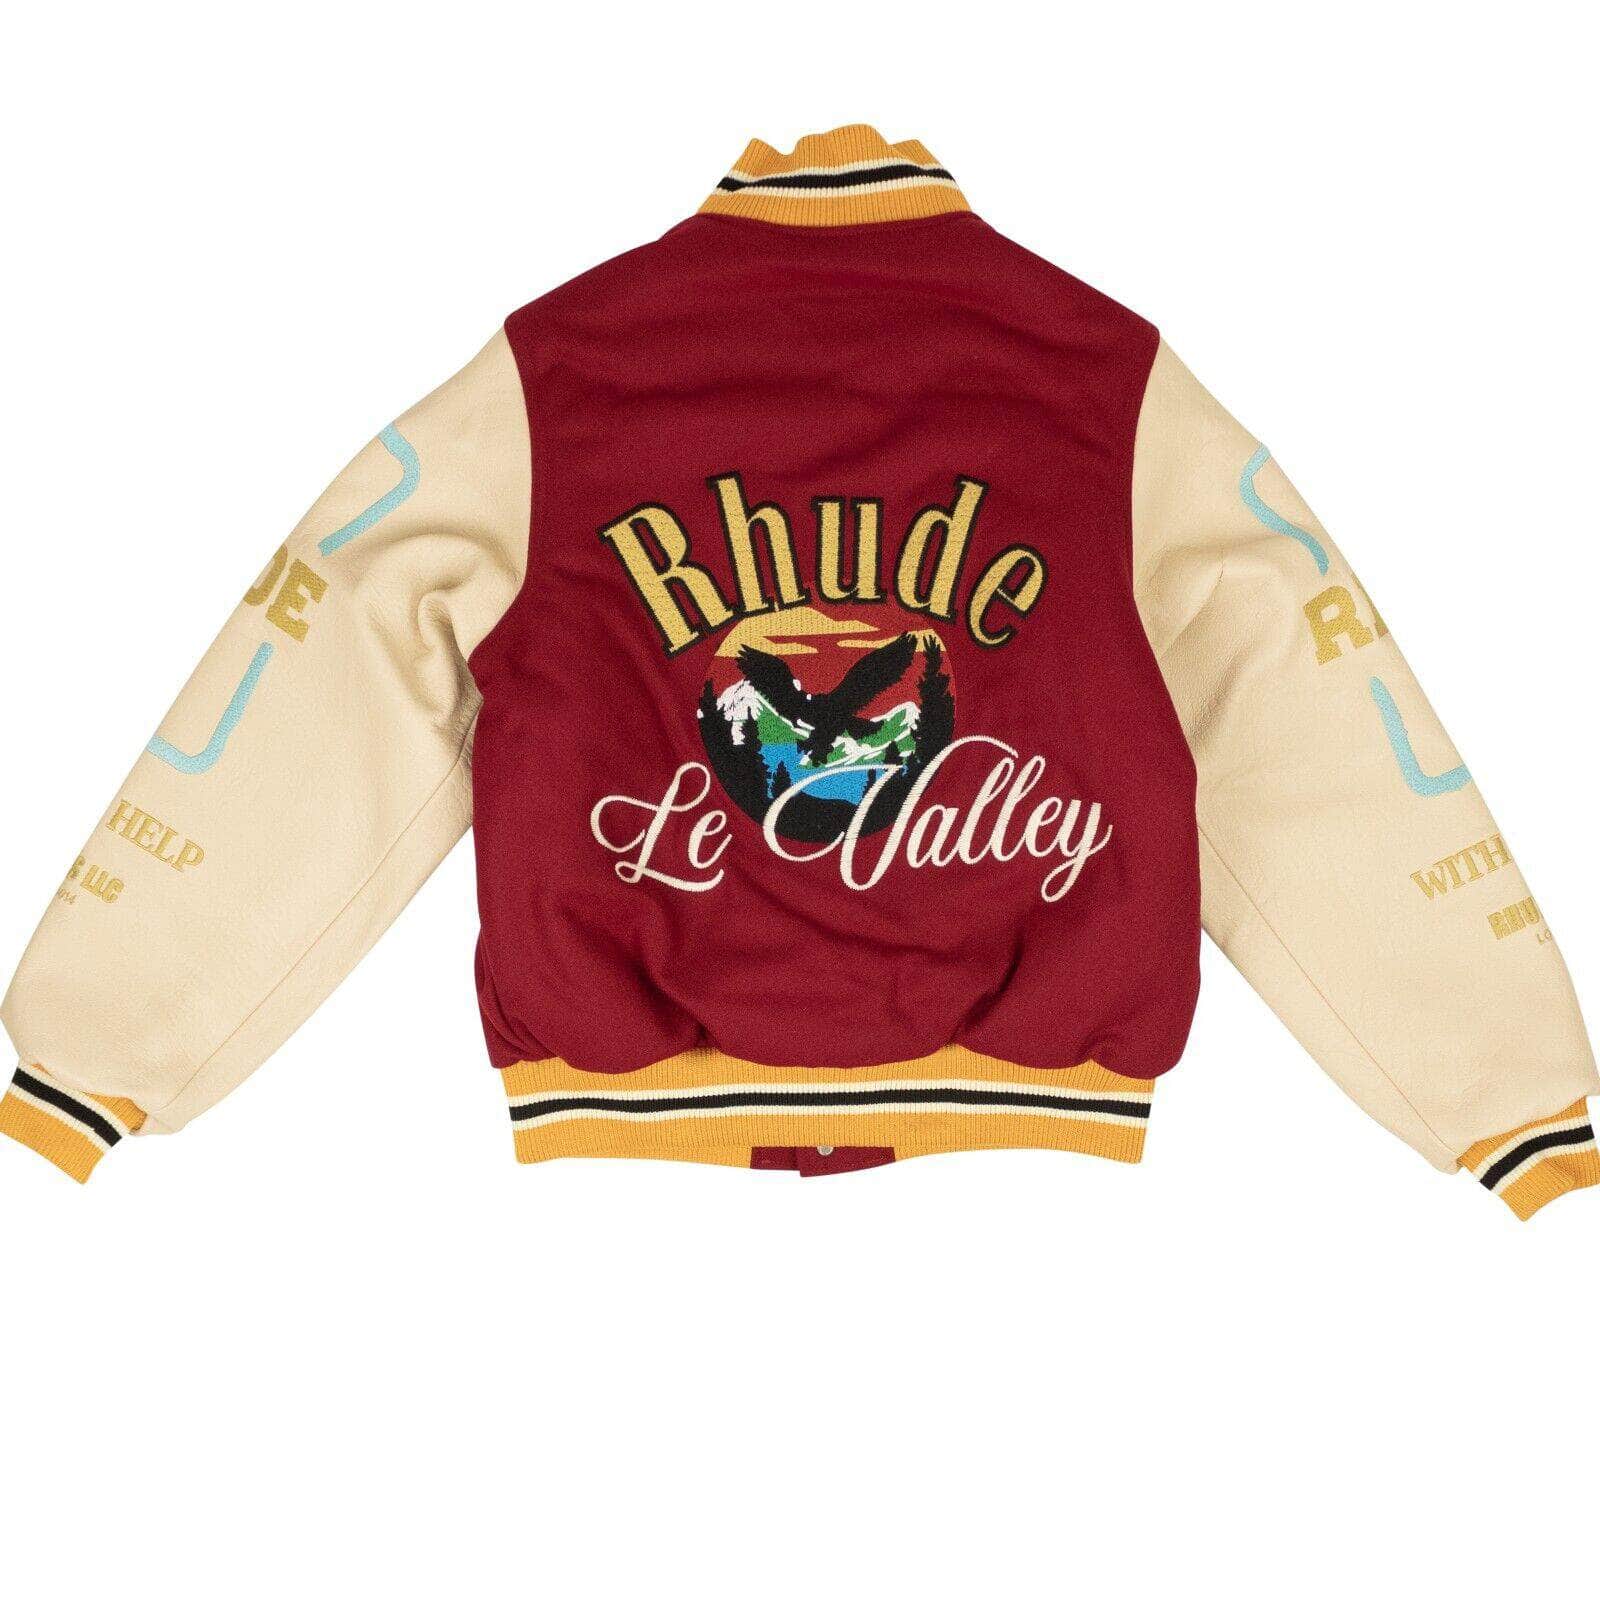 Rhude 1000-2000, channelenable-all, chicmi, couponcollection, gender-mens, main-clothing, mens-shoes, mens-varsity-jackets, rhude, size-l, size-m, size-xl, size-xxl Bordoux And Creme Le Valley Varsity Jacket